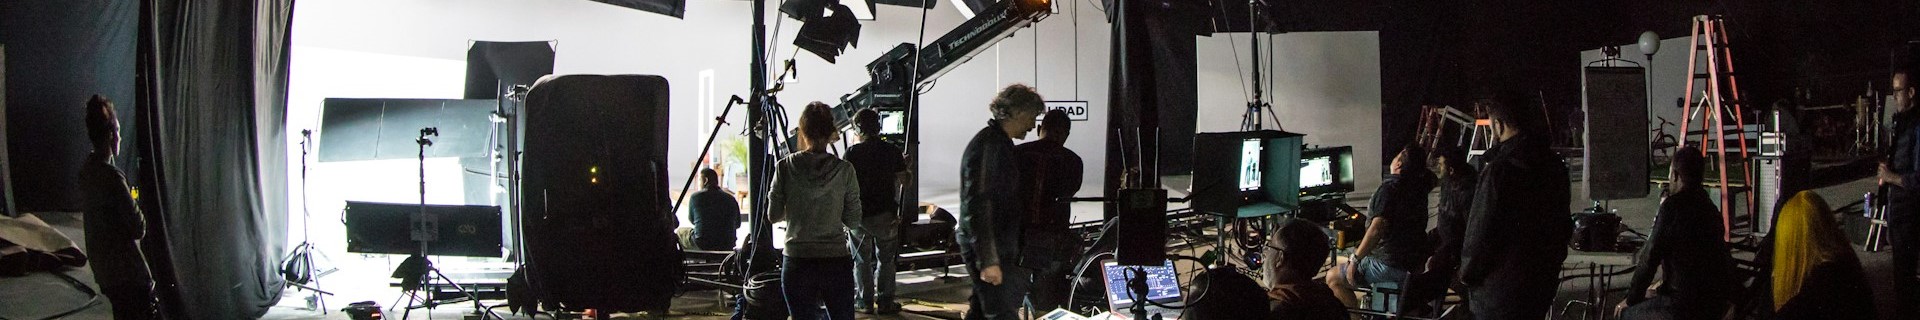 A panoramic view of an interior film set.